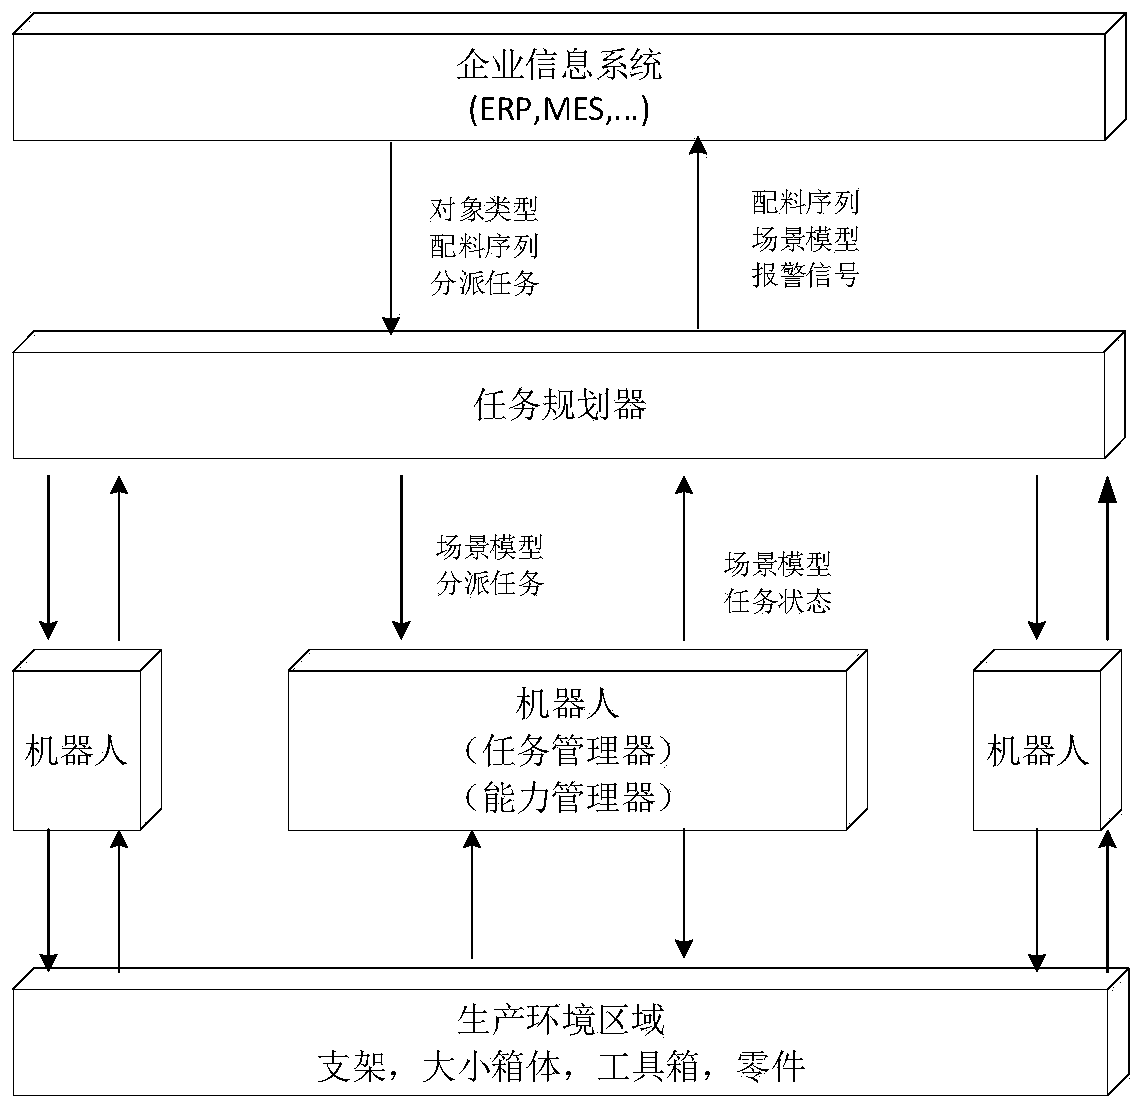 Control system based on robot capability model